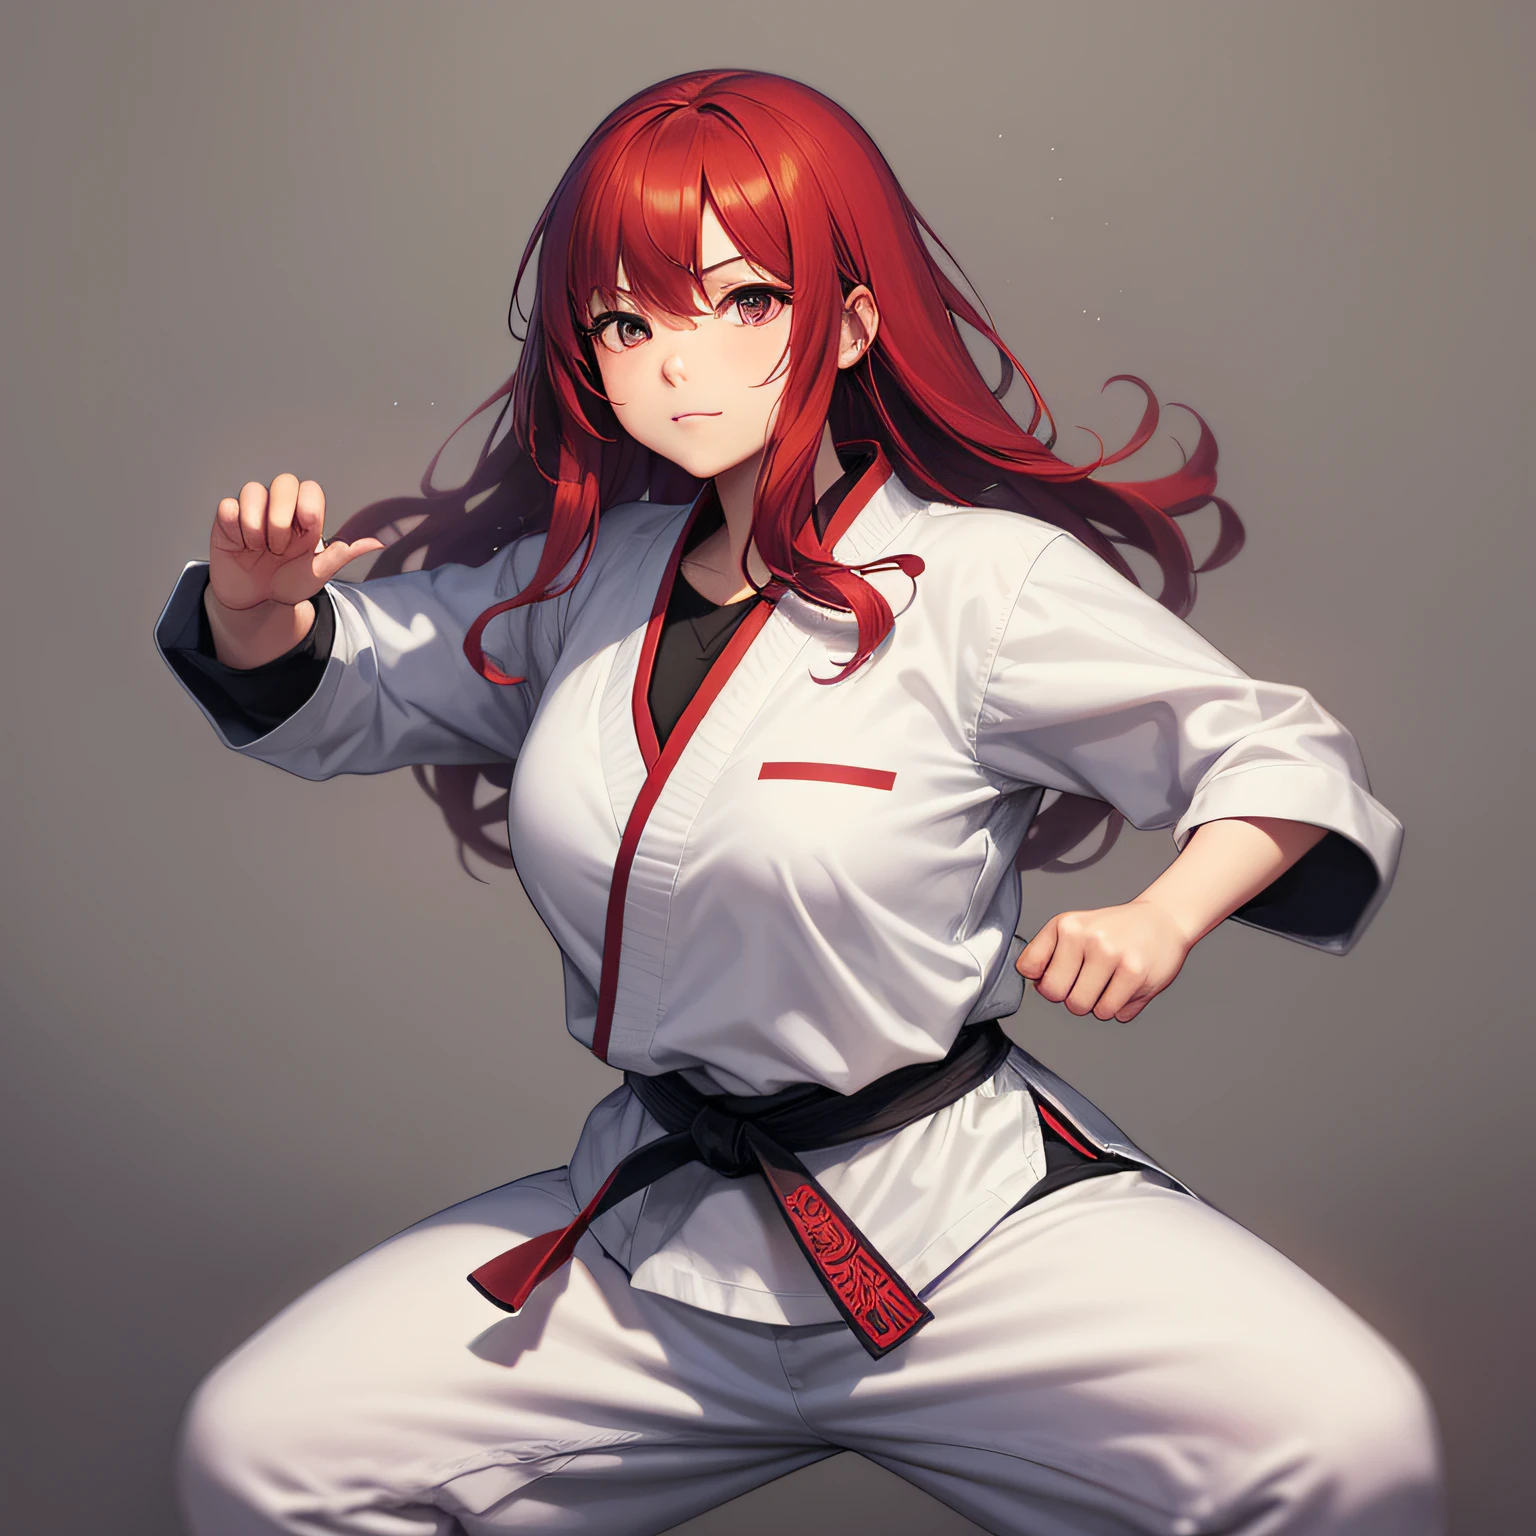 Short Chubby Asian Girl with Long Red Hair doing martial arts. Manga Sketch